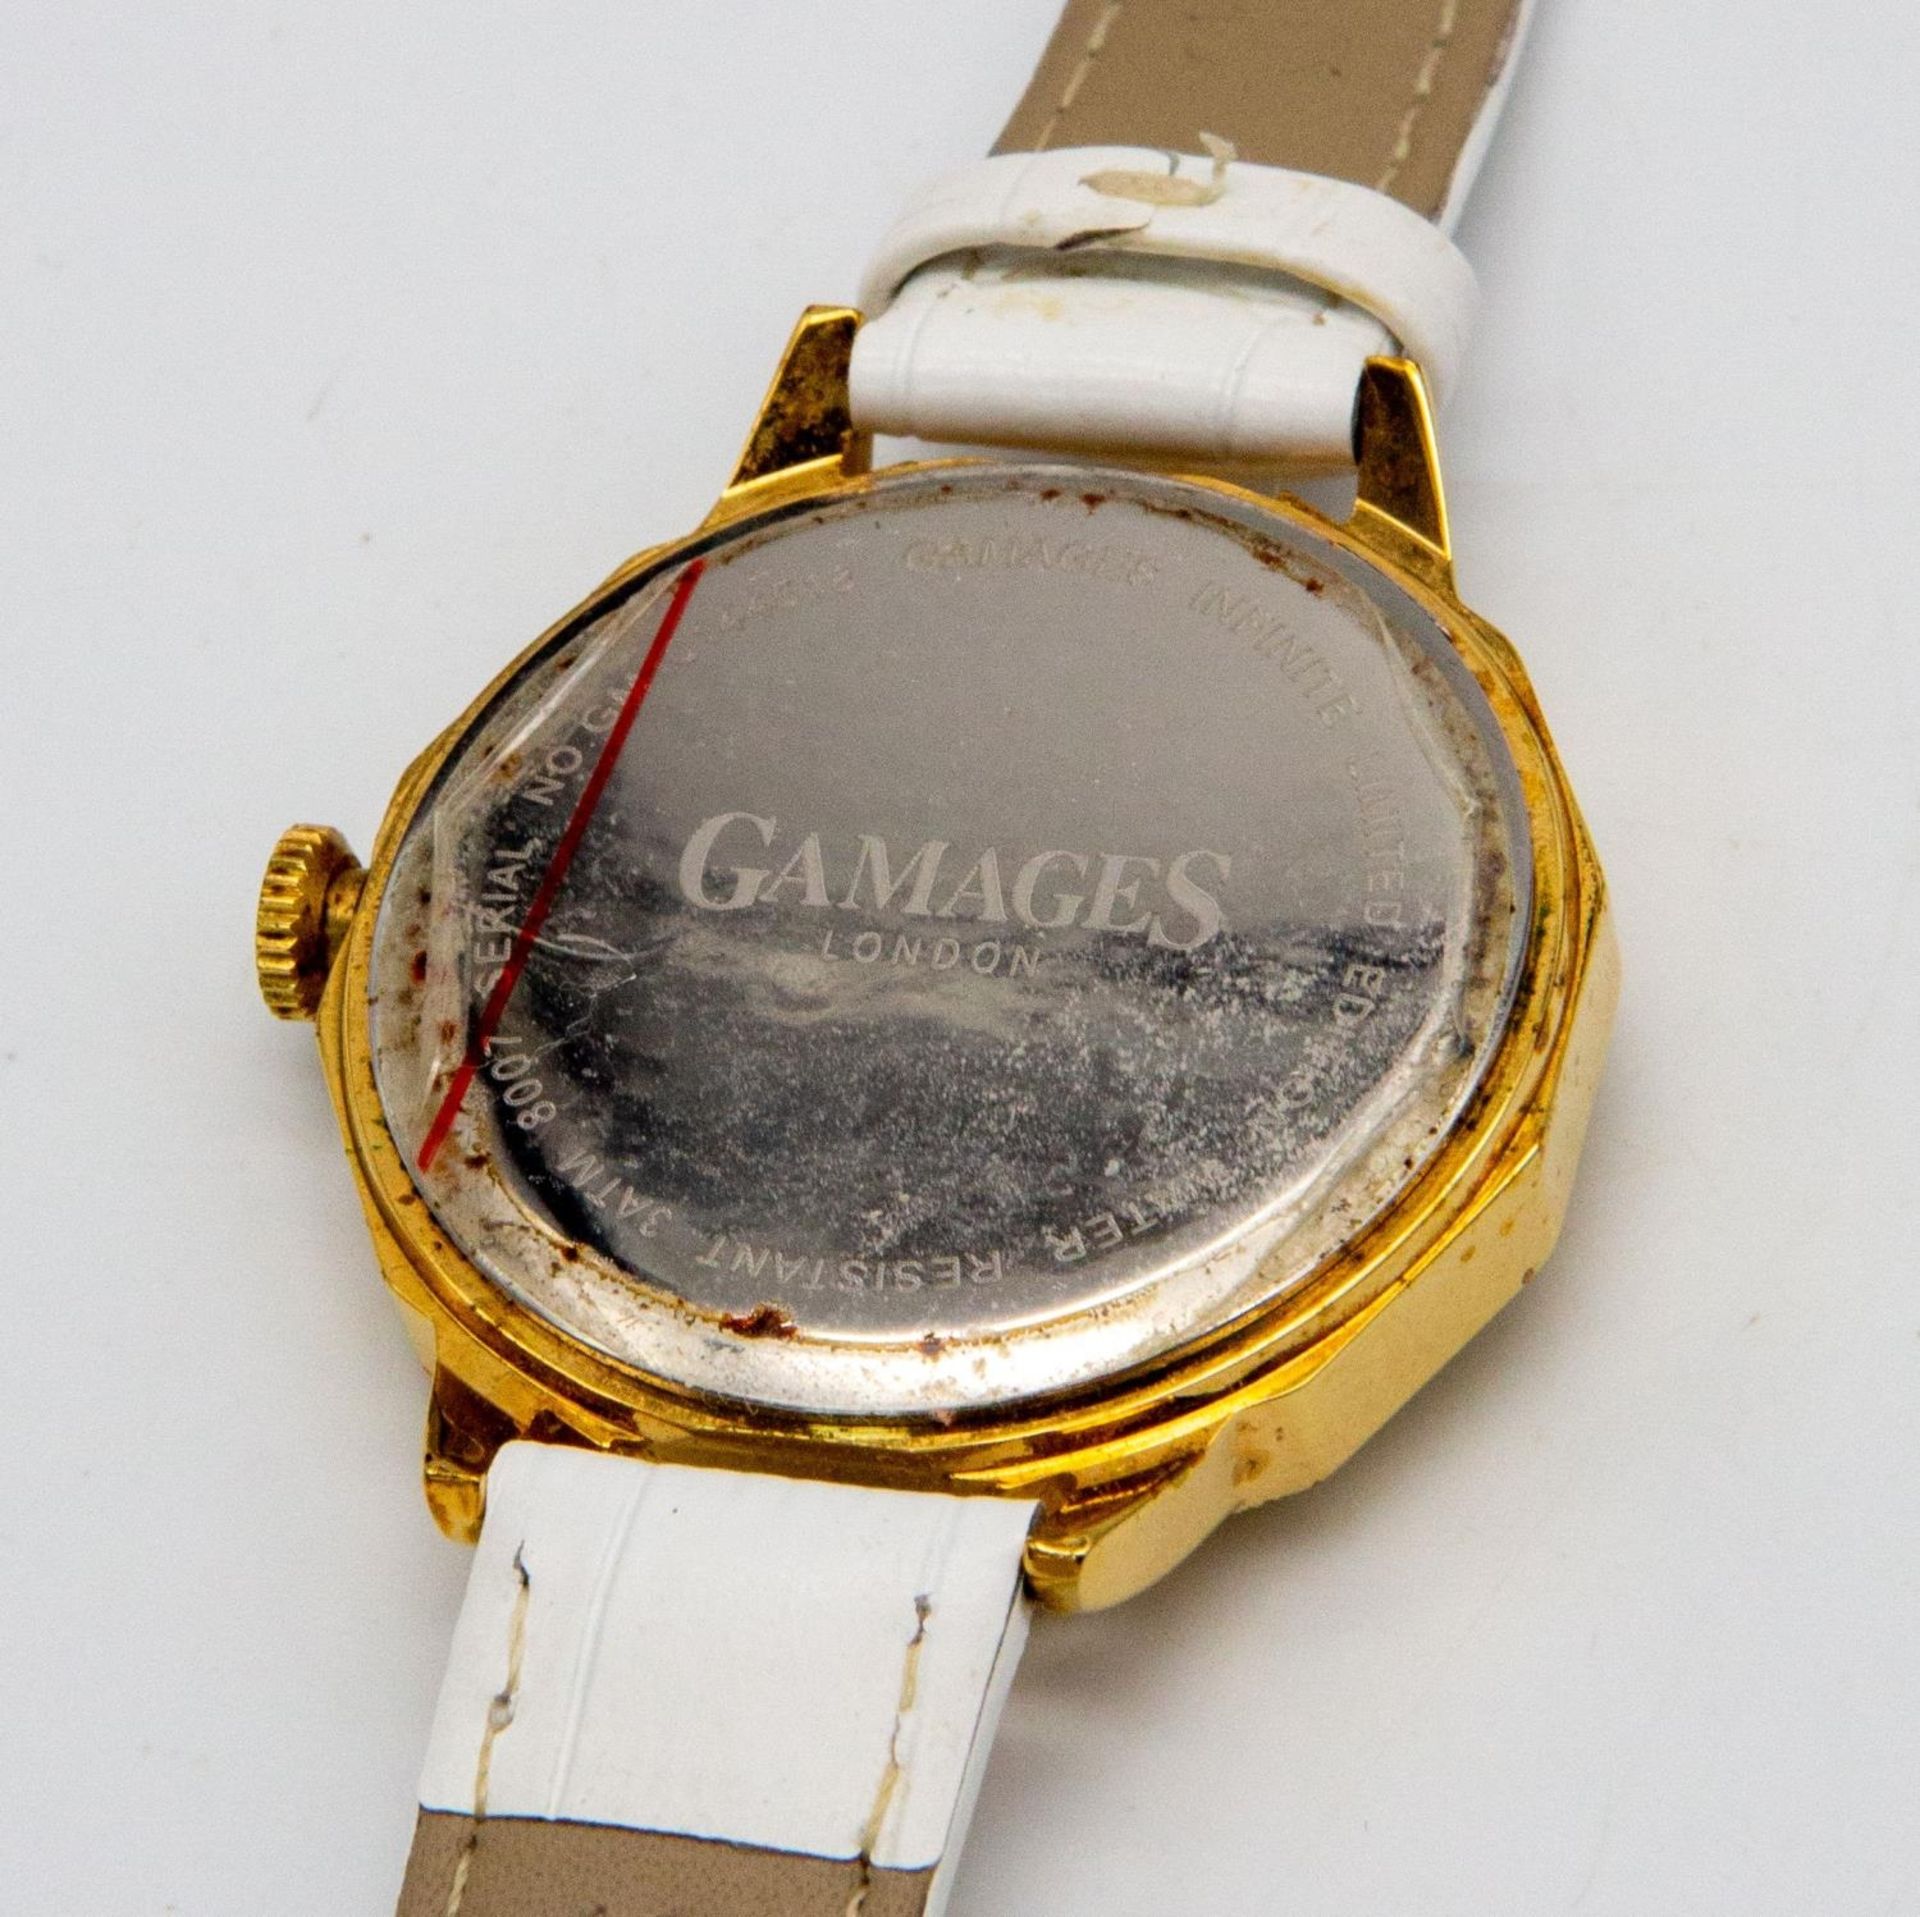 A Gamages of London Quartz Ladies Watch. White leather strap. Gilded case - 38mm. Silver tone - Image 2 of 5